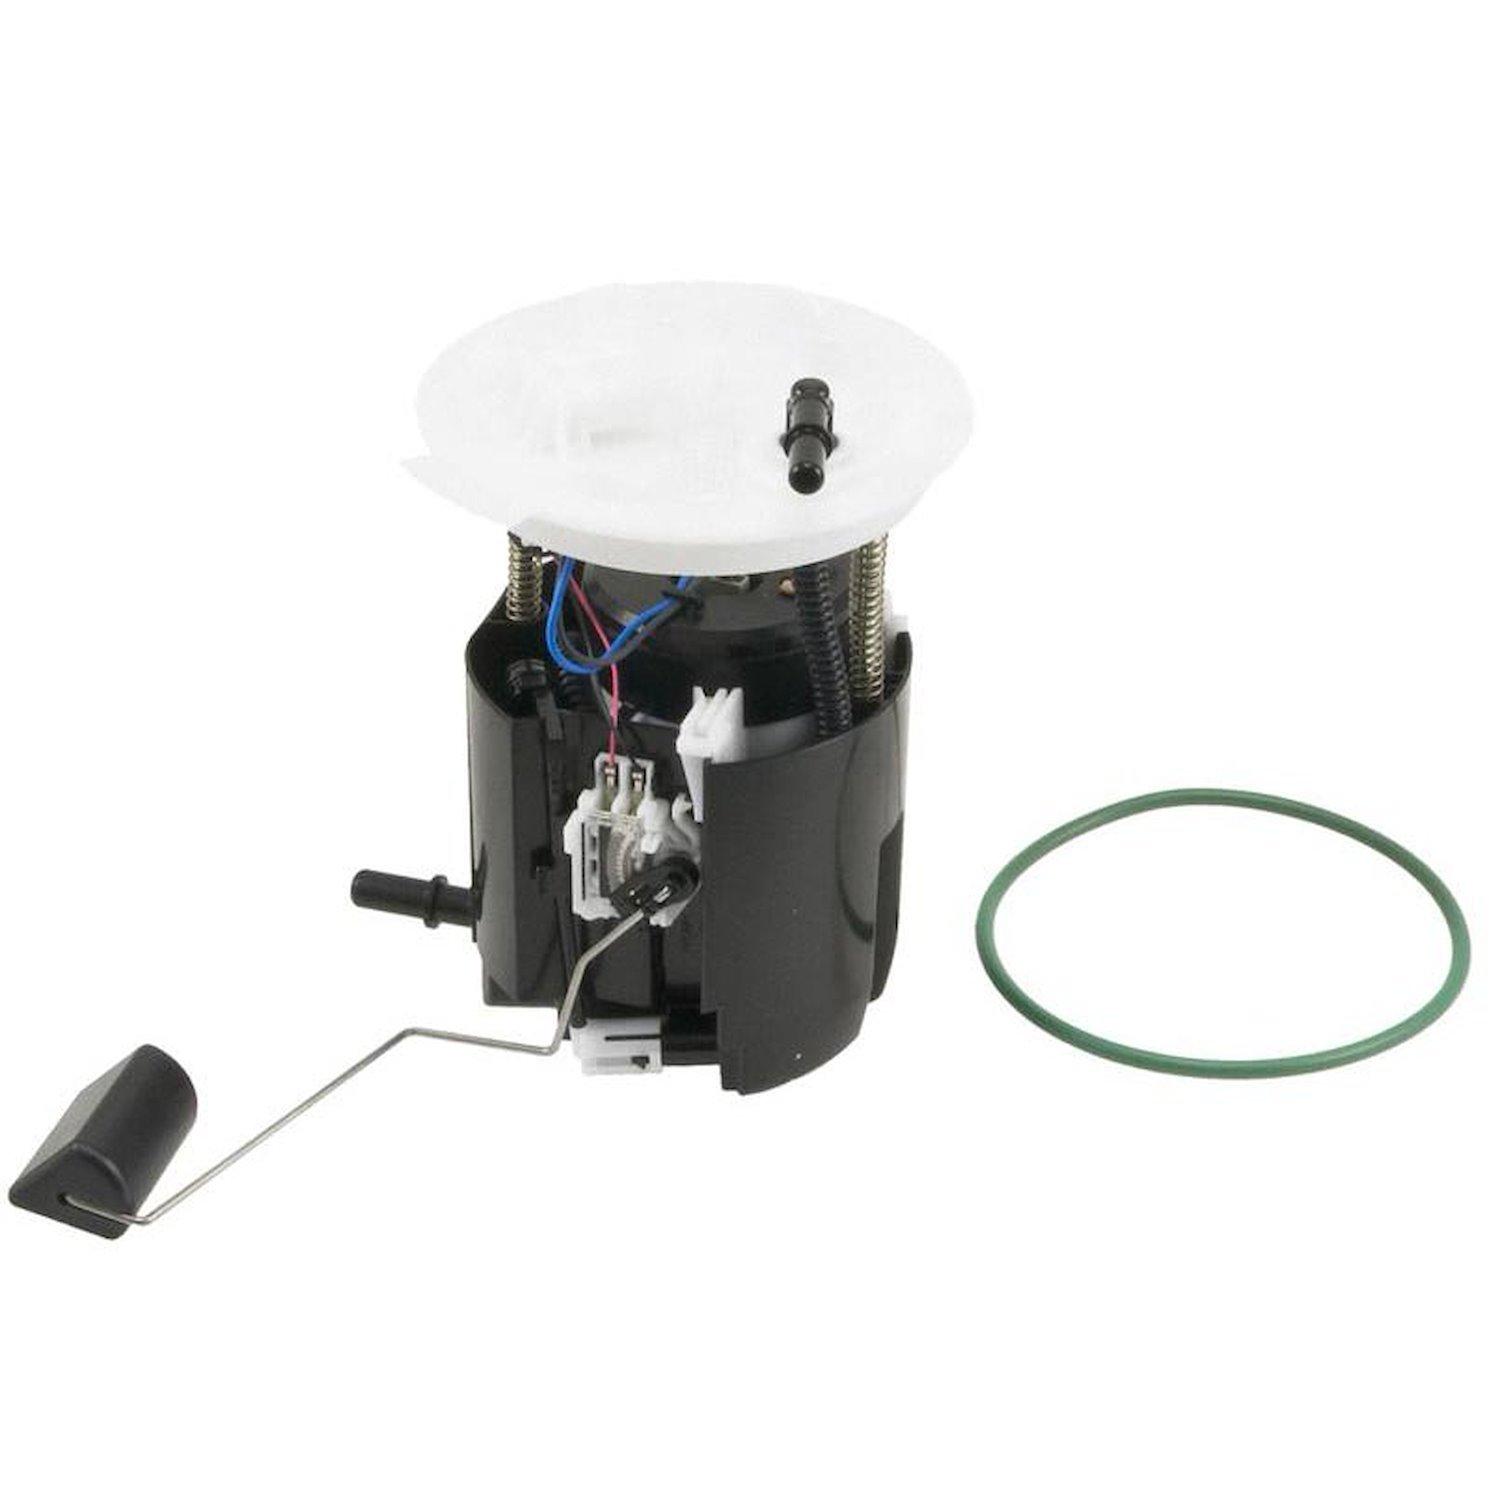 OE GM Replacement Electric Fuel Pump Module Assembly for 2008-2009 Cadillac CTS